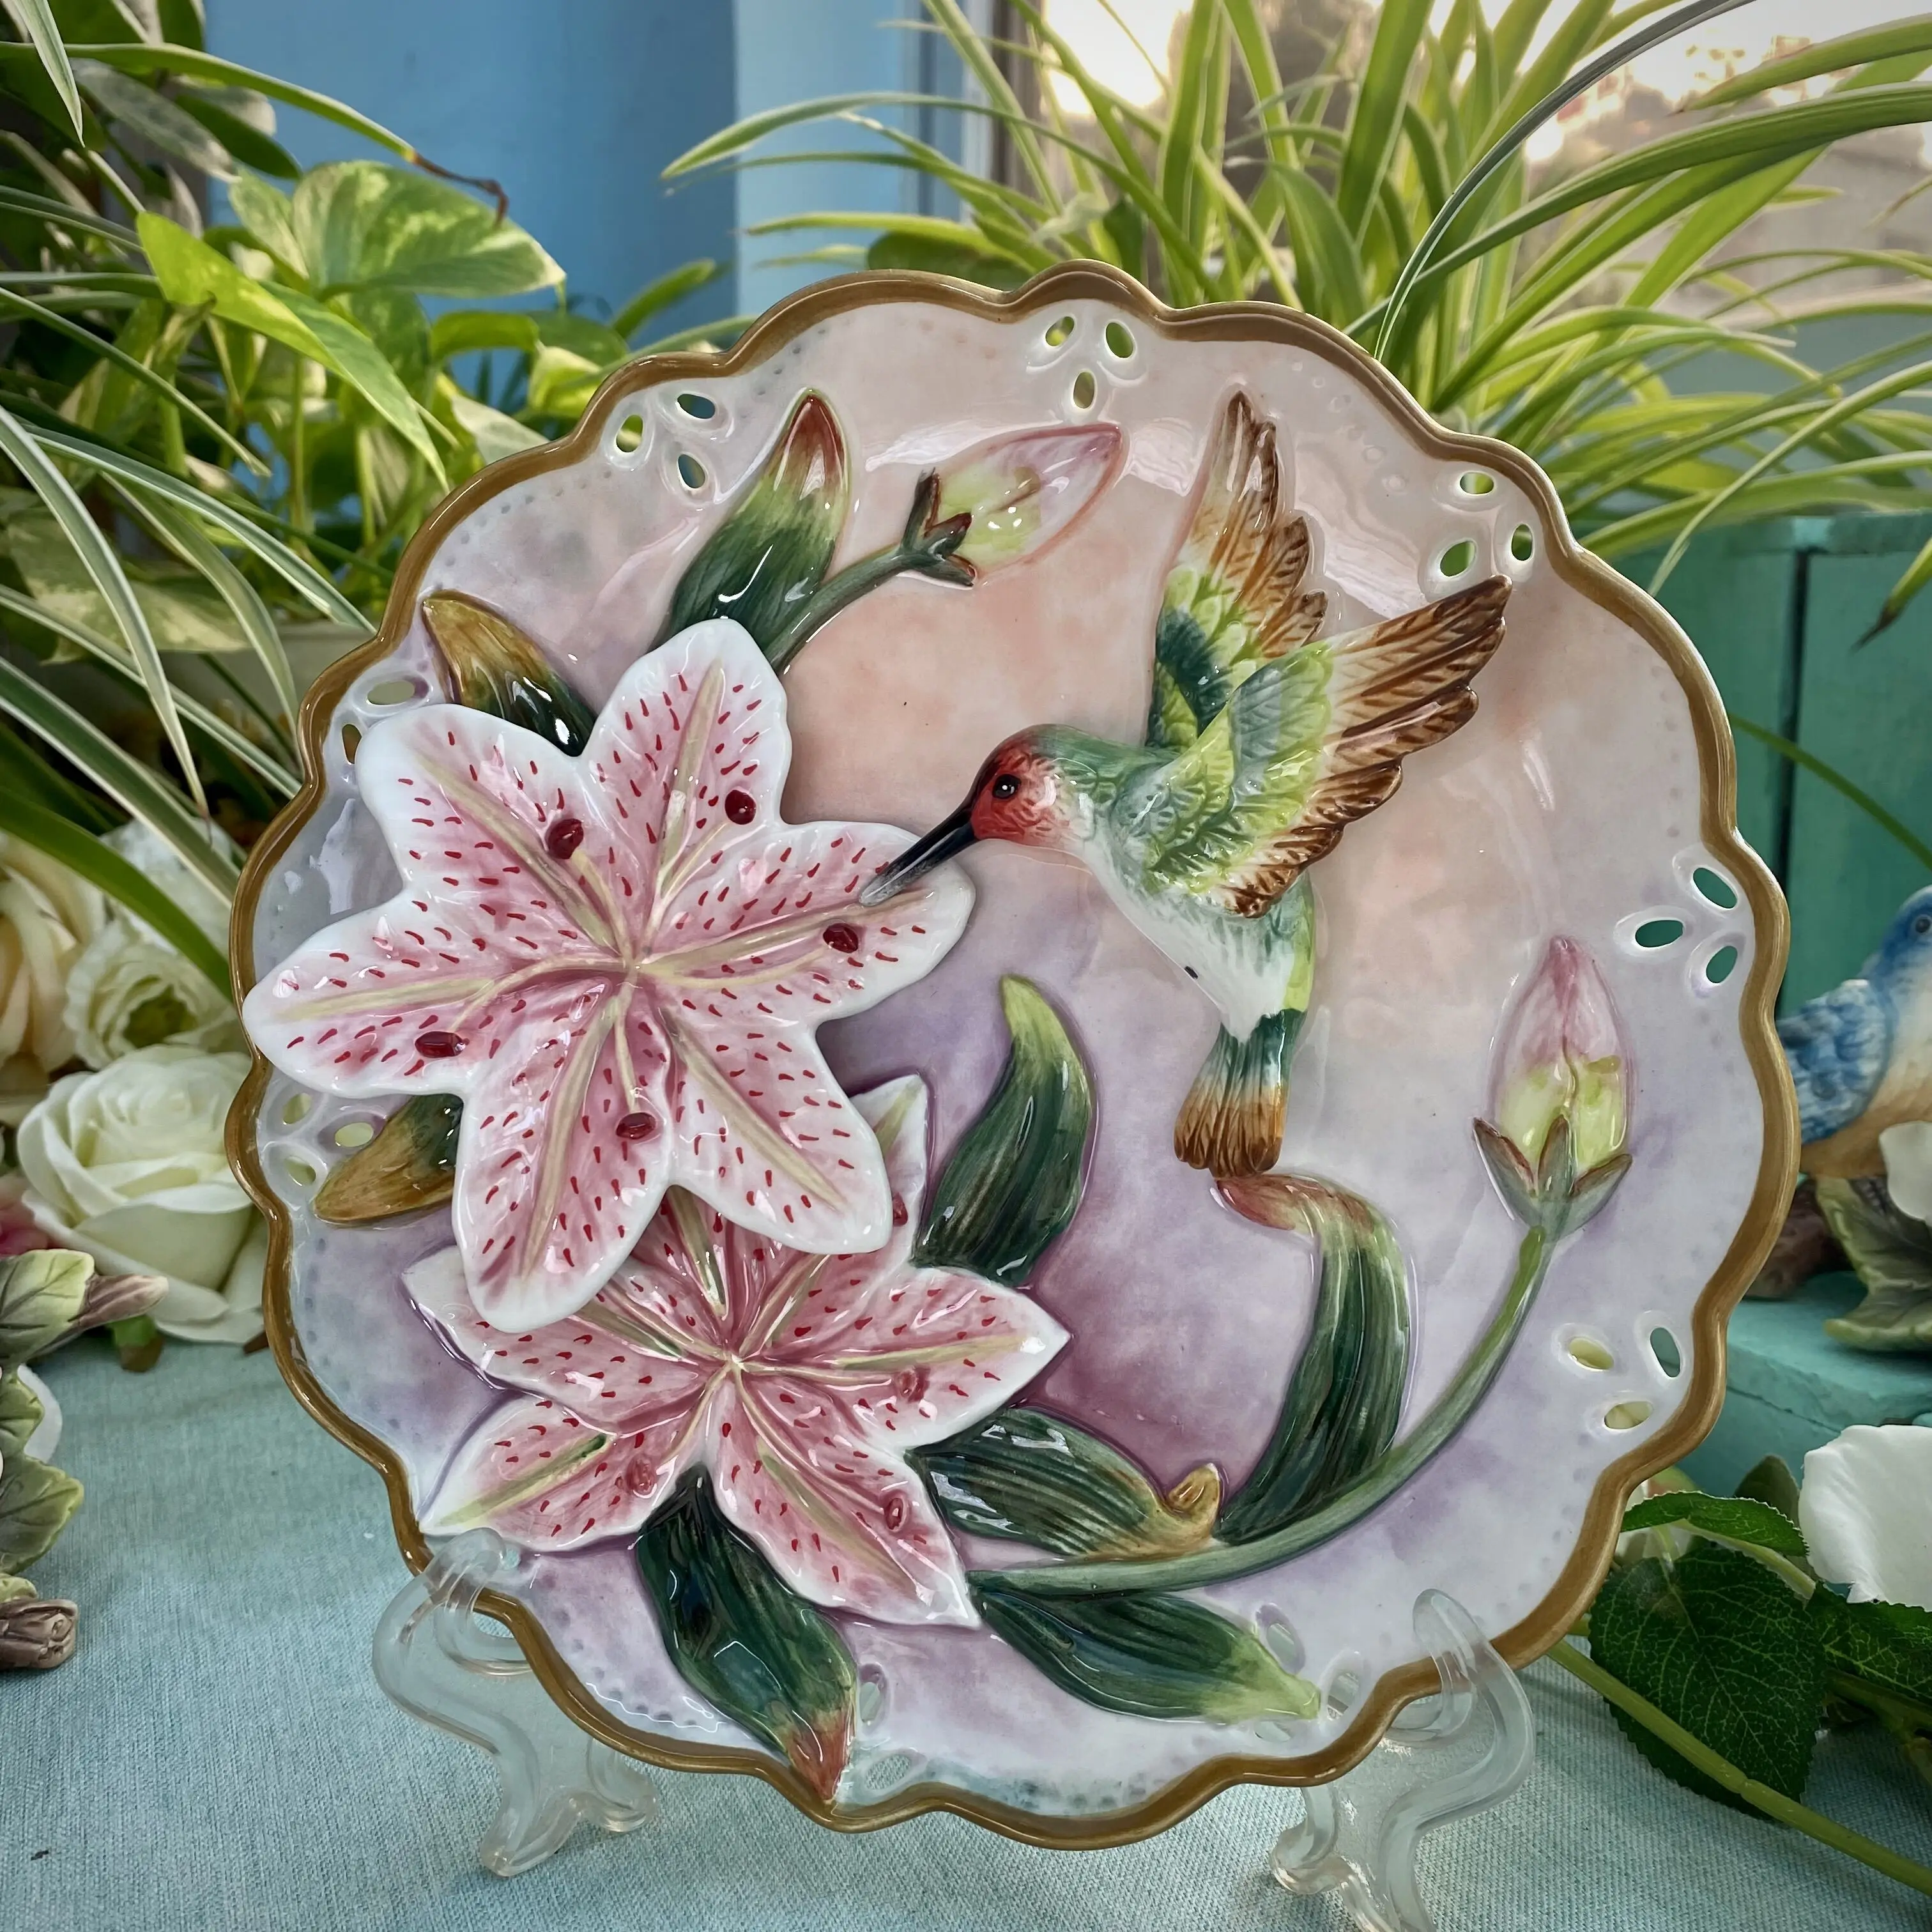 

3D Lily Hummingbird Decorative Wall Dishes Porcelain Decorative Plates Home Decor Crafts Room Decoration Accessories Figurine